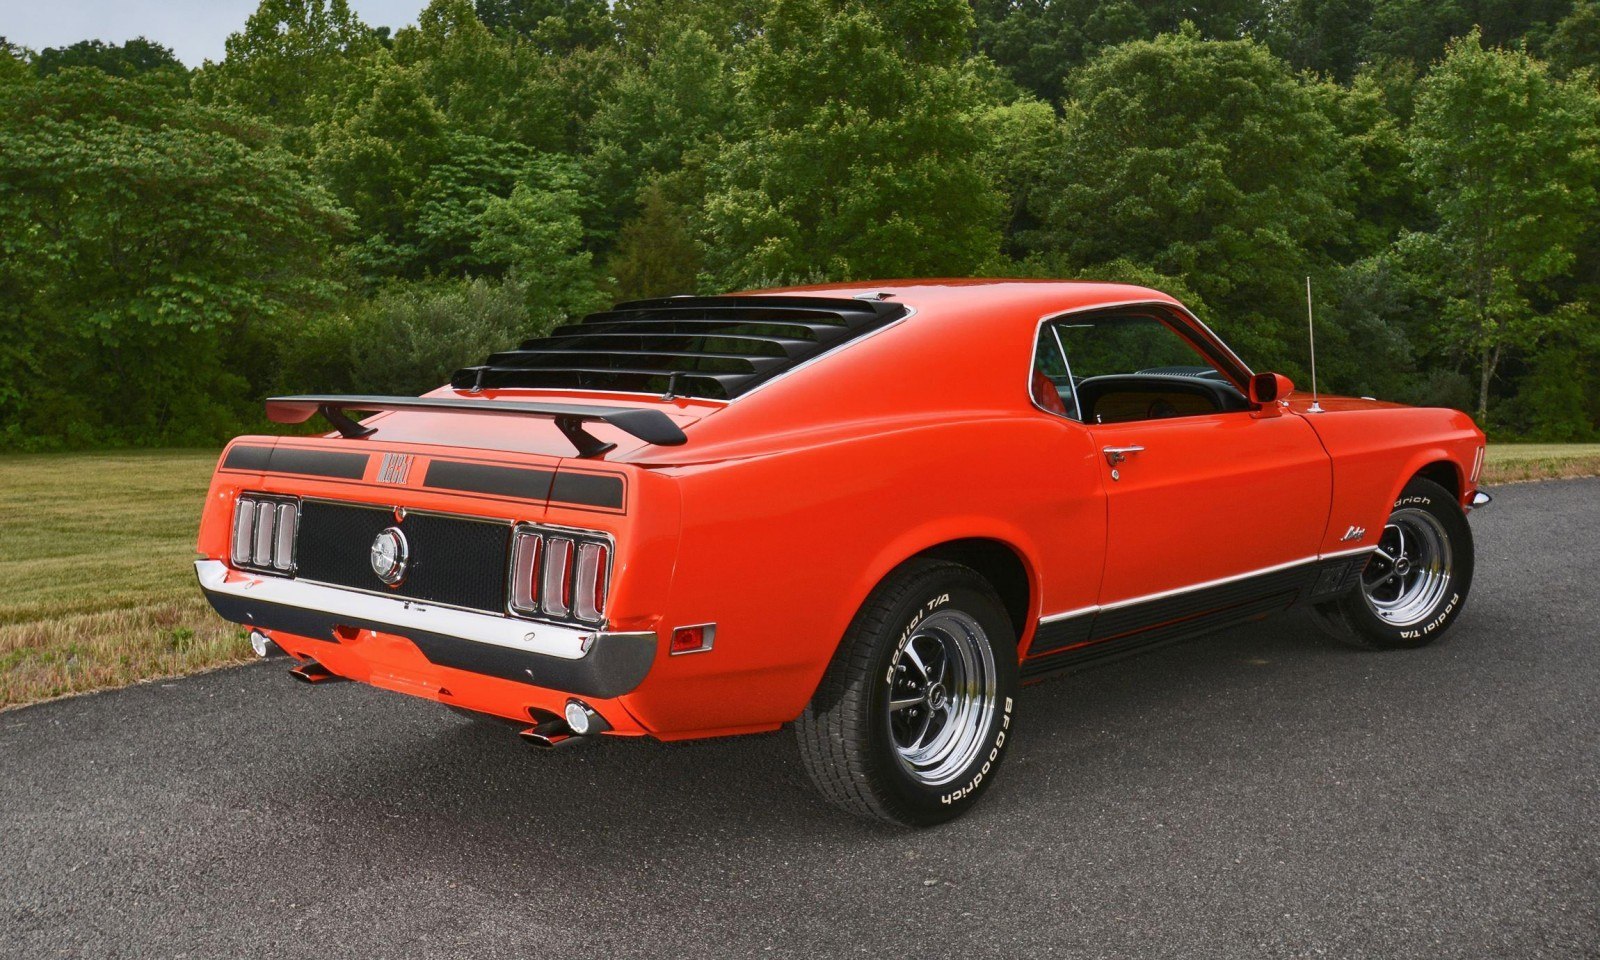 S114_1970 Ford Mustang Mach 1 Fastback Calypso Coral 18